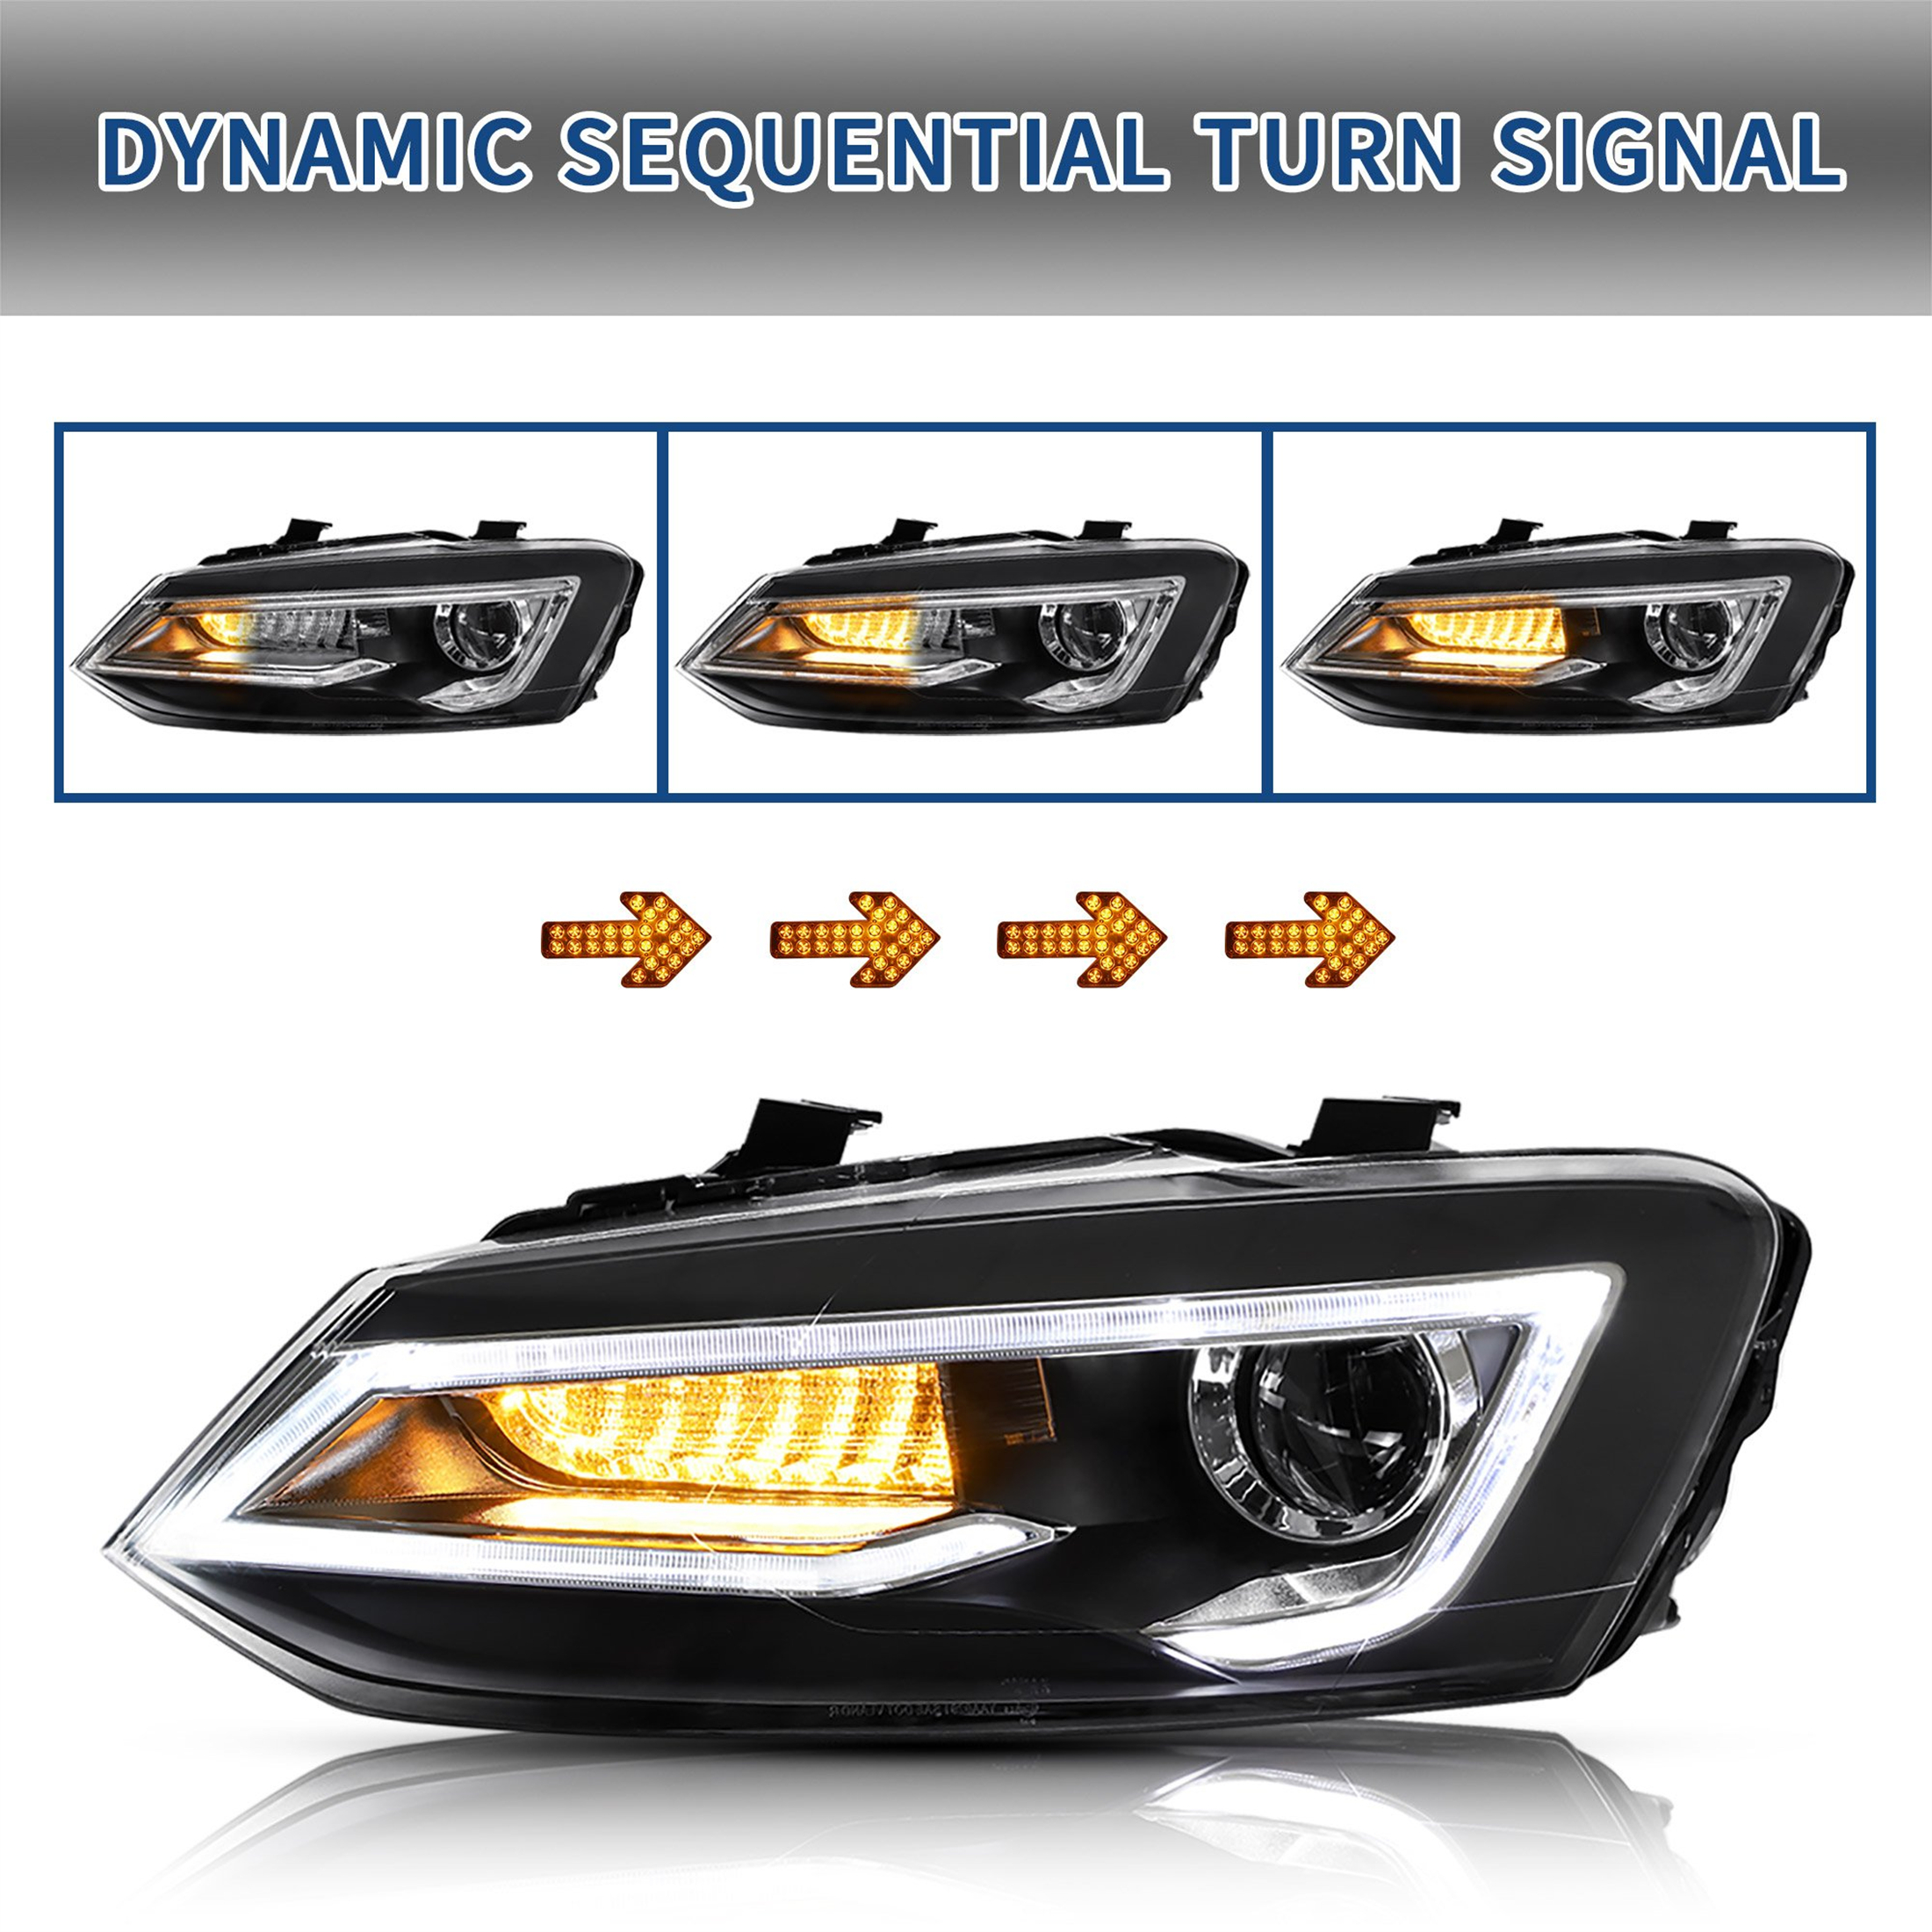 LED Headlights For Volkswagen (VW) Polo 2011-2017 Turn Signal Light  Assembly